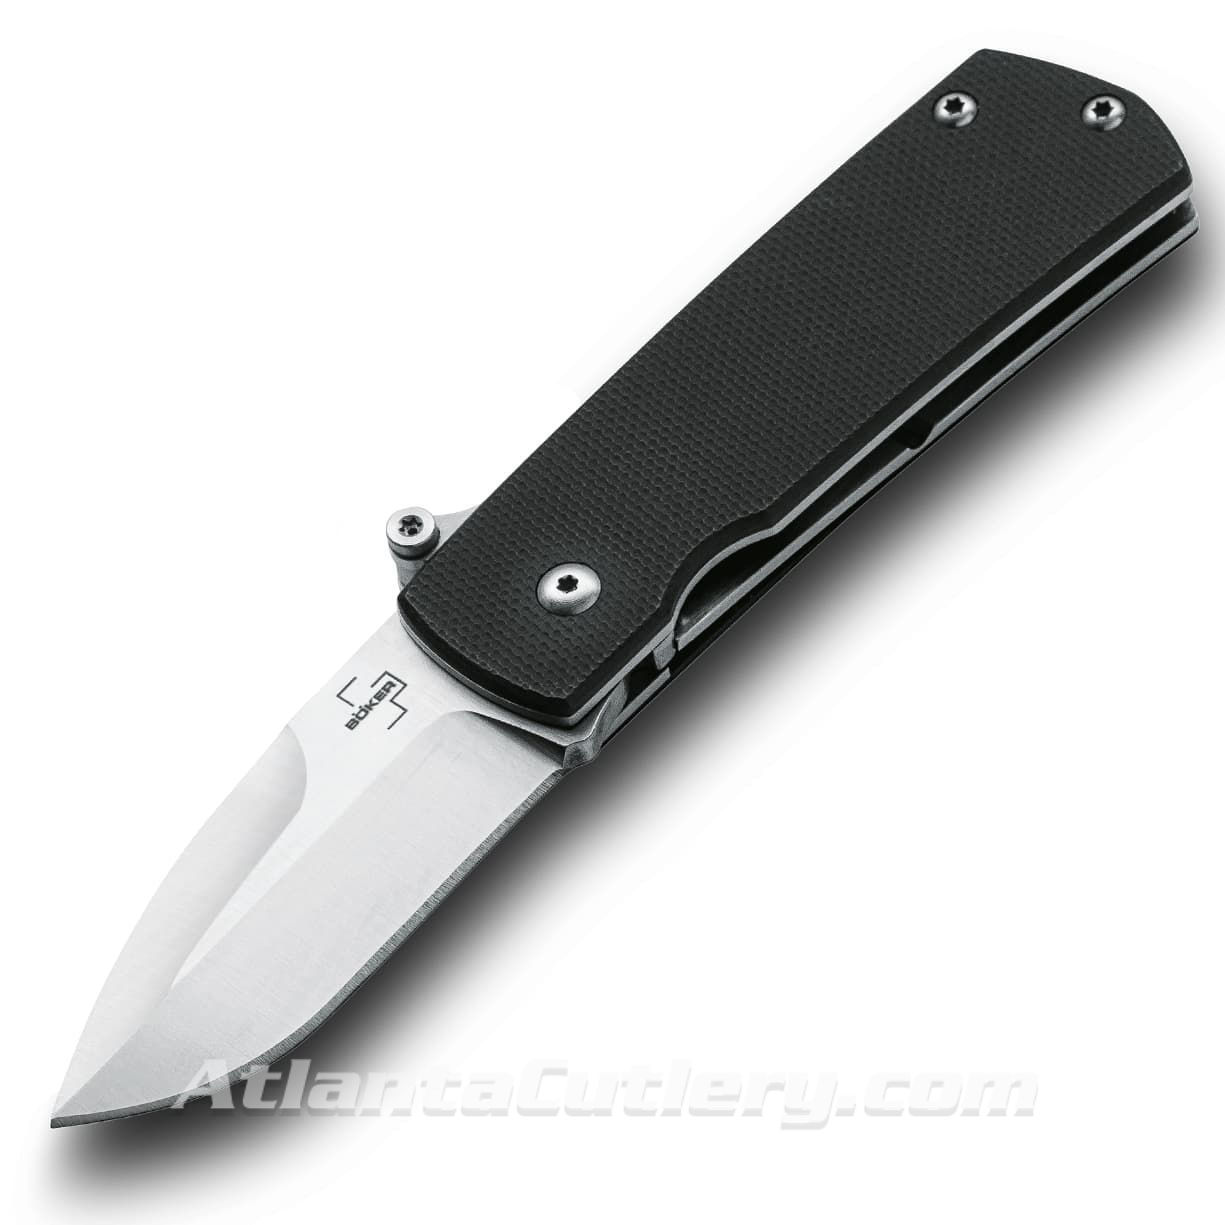 Boker Plus Shamsher automatic pocket knife with D2 steel blade, textured G10 scales for secure handling, legal in all 50 states